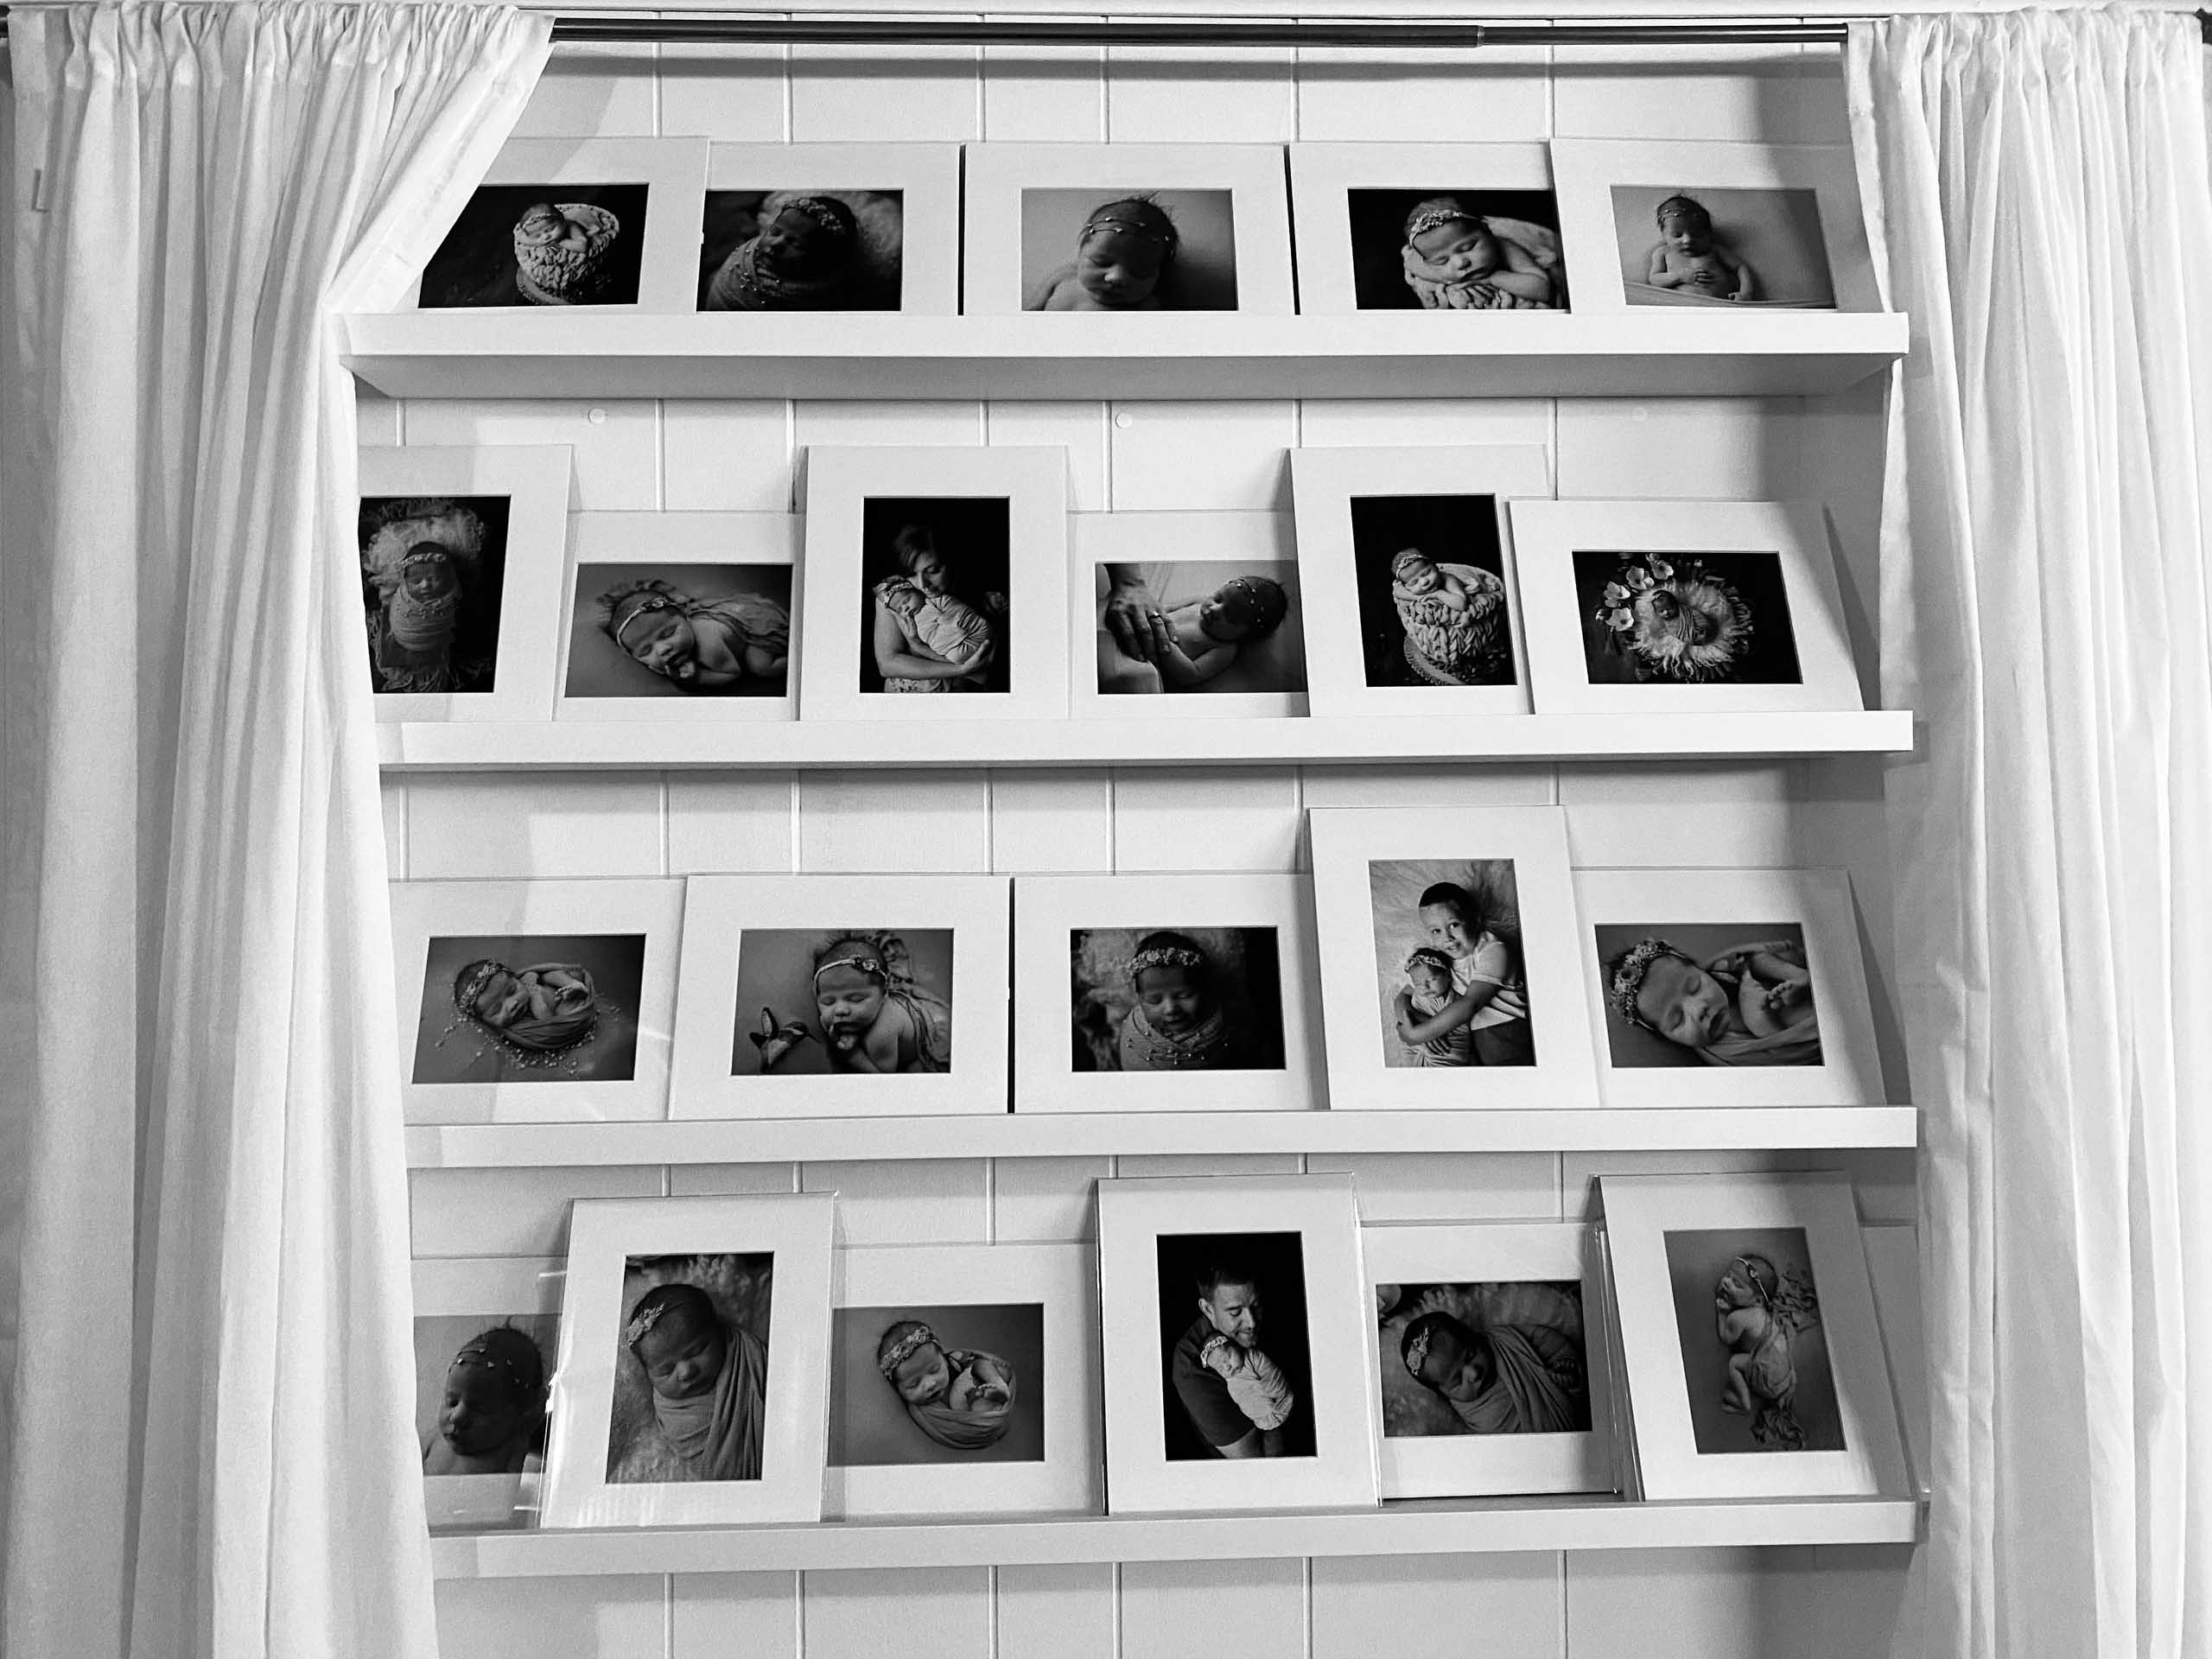 reveal wall set up for newborn session matted images on shelves behind curtains